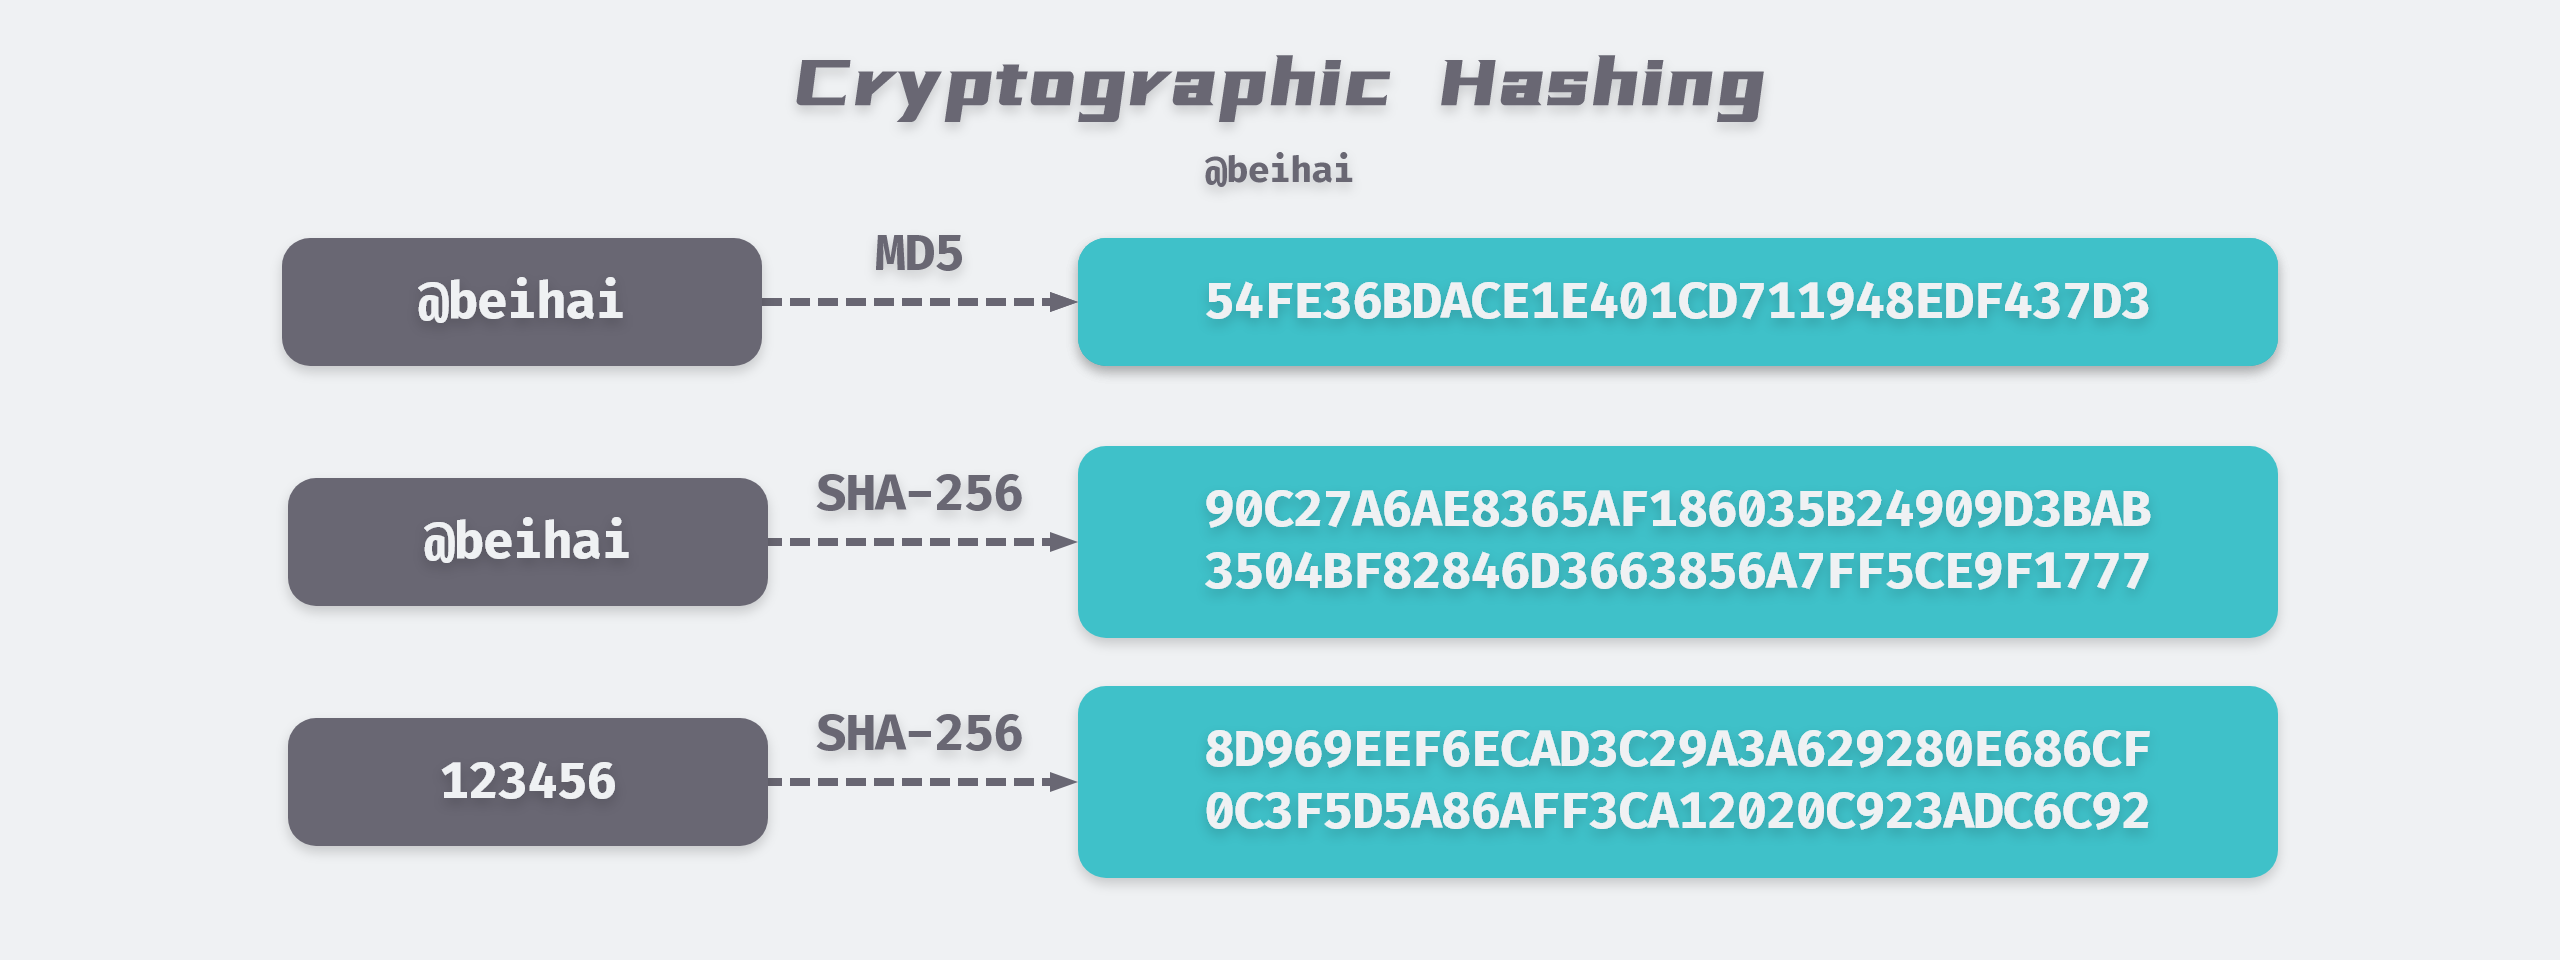 cryptographic hash